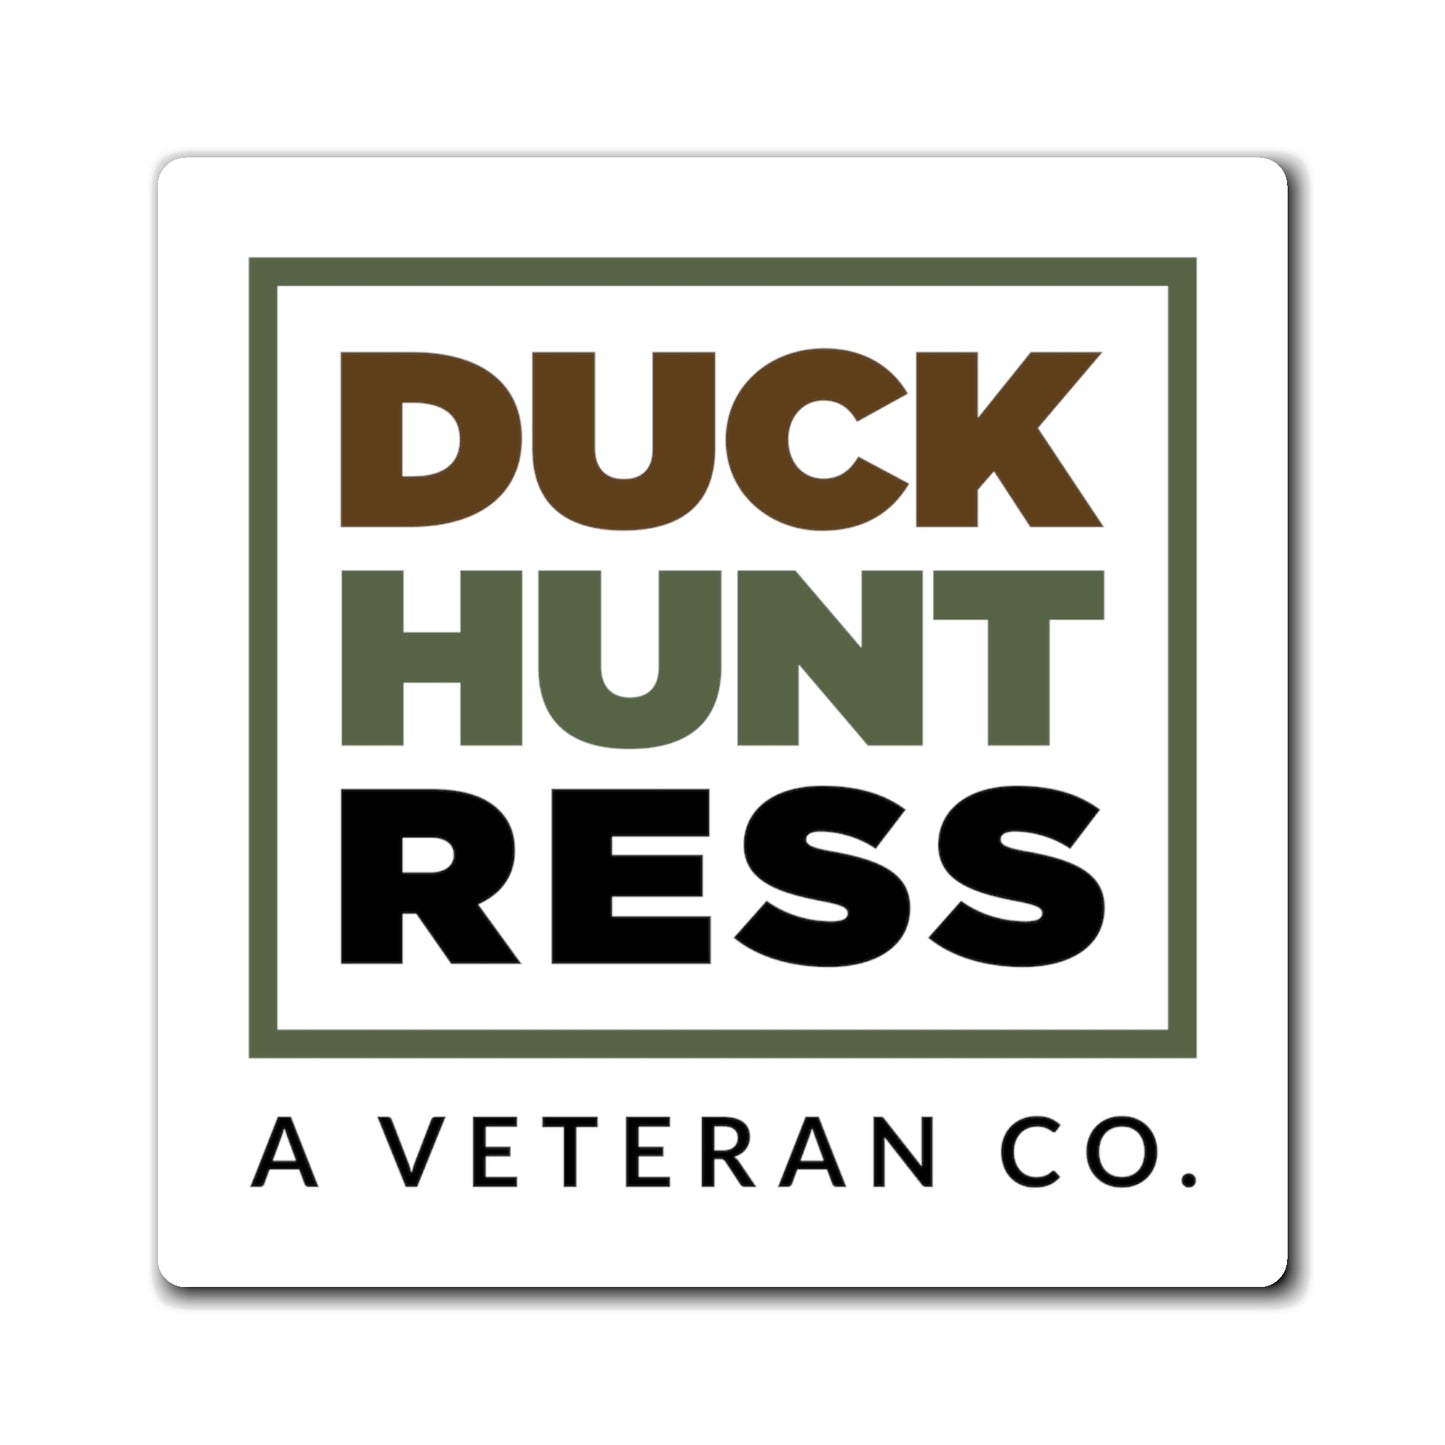 DUCK HUNTRESS Magnet (3 Size Options)